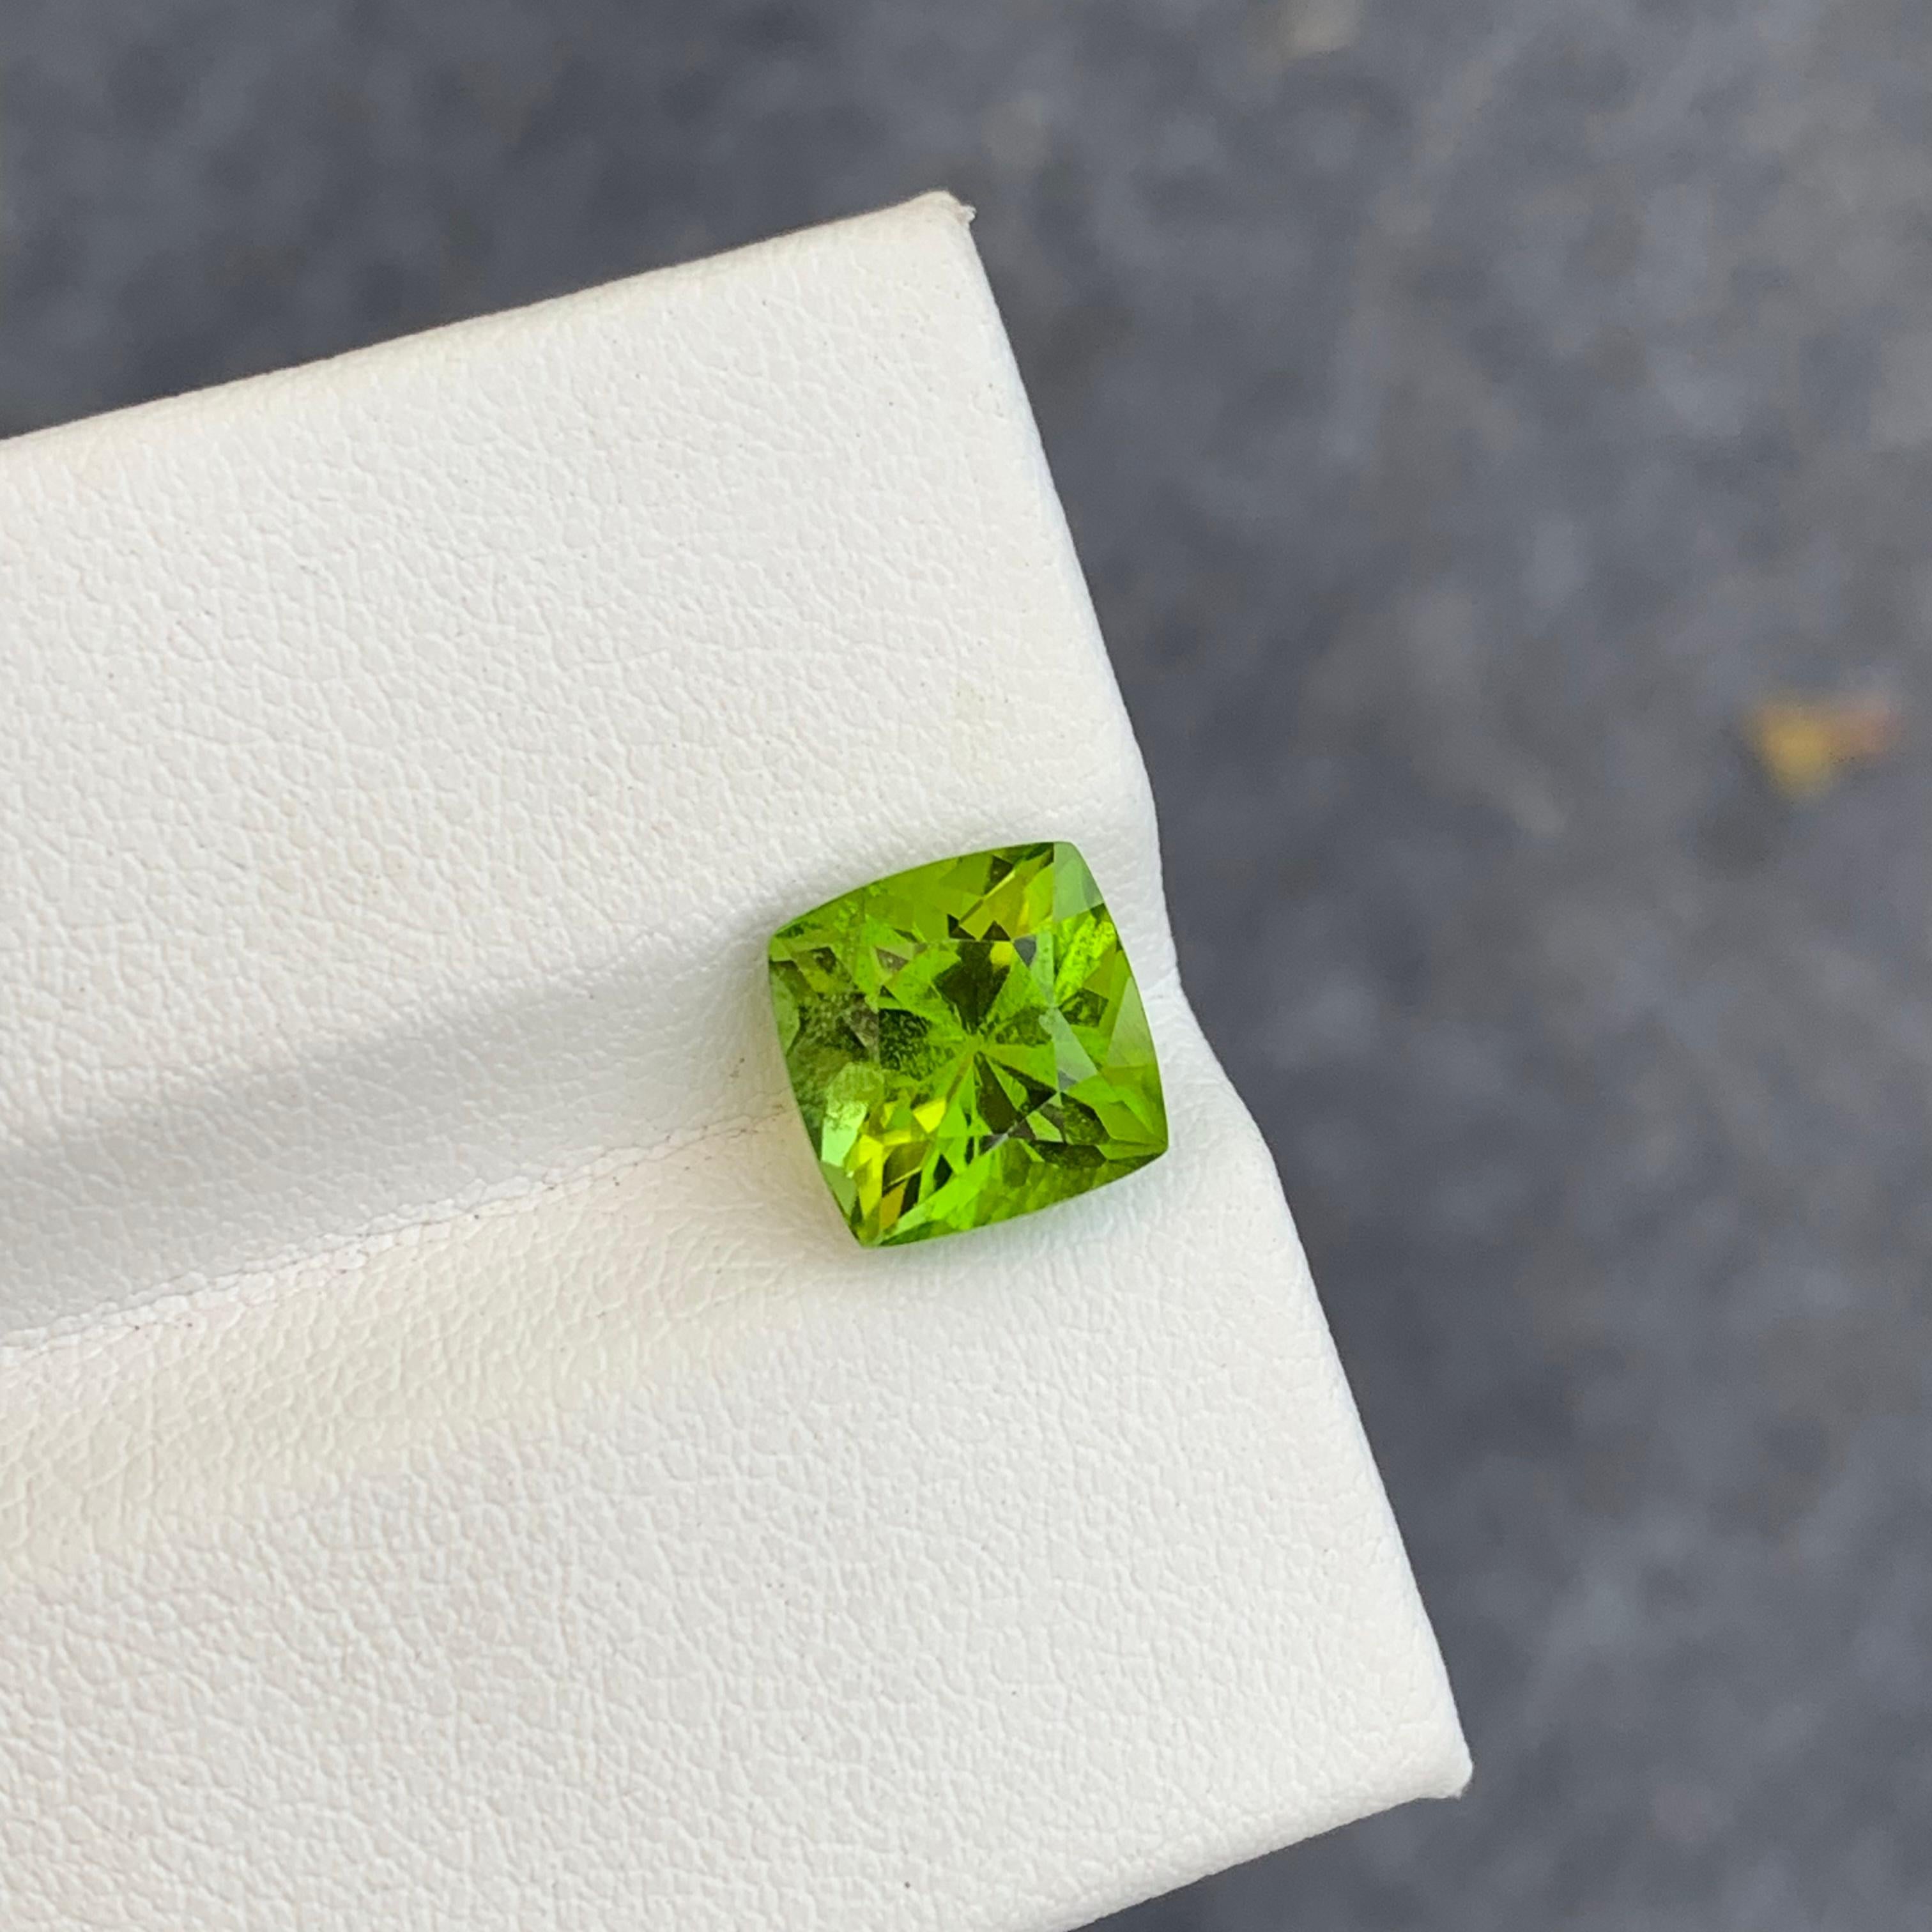 Arts and Crafts 4.75 Carat Natural Apple Green Loose Peridot Gemstone From Pakistan SI Clarity For Sale